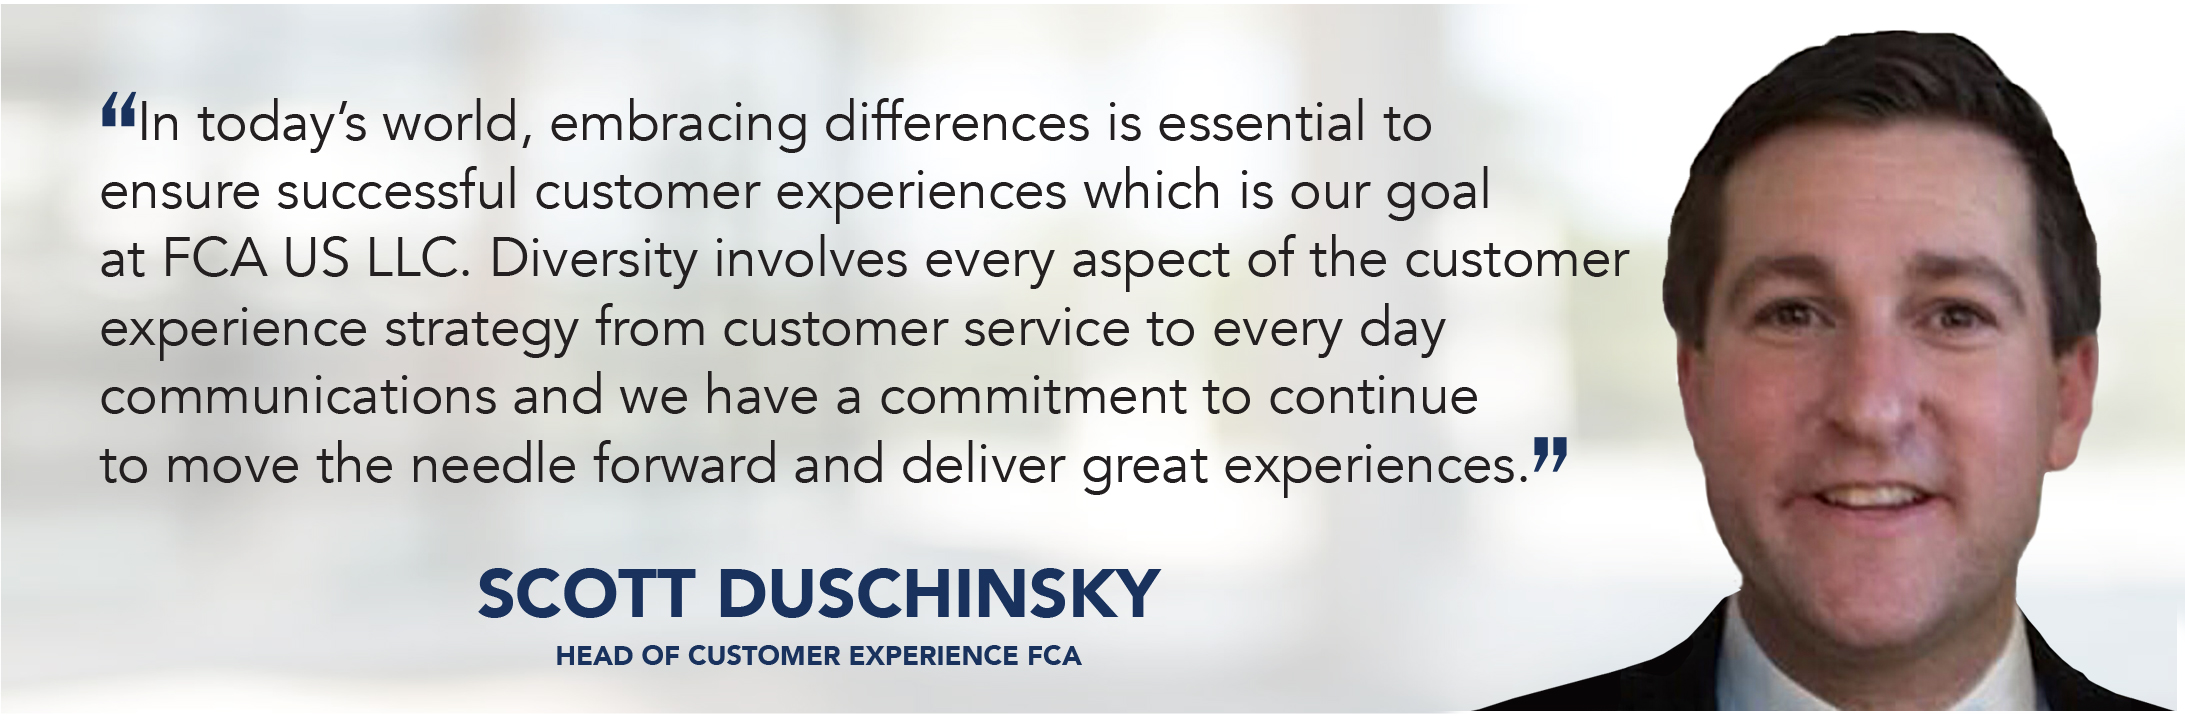 In today’s world, embracing differences is essential to ensure successful customer experiences which is our goal at FCA US LLC. Diversity involves every aspect of the customer experience strategy from customer service to every day communications and we have a commitment to continue to move the needle forward and deliver great experiences. - Scott Duschinsky